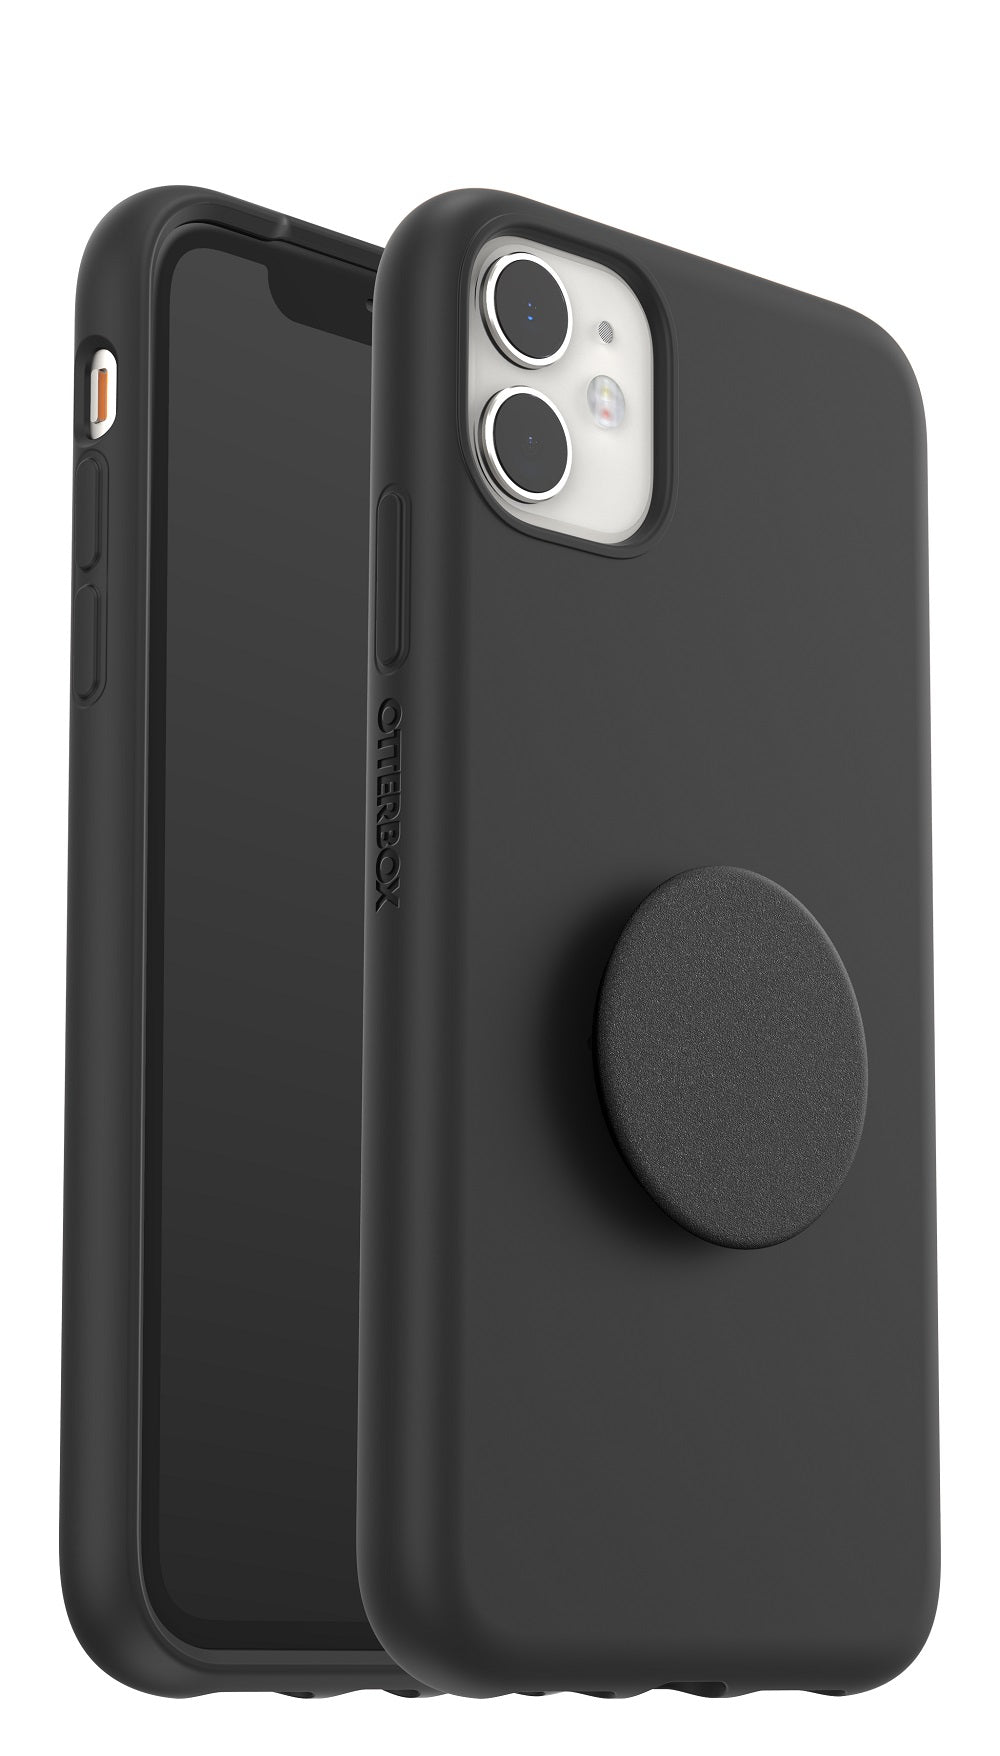 OtterBox + POP Ultra Slim Soft Touch Case for Apple iPhone 11 - Black (New)